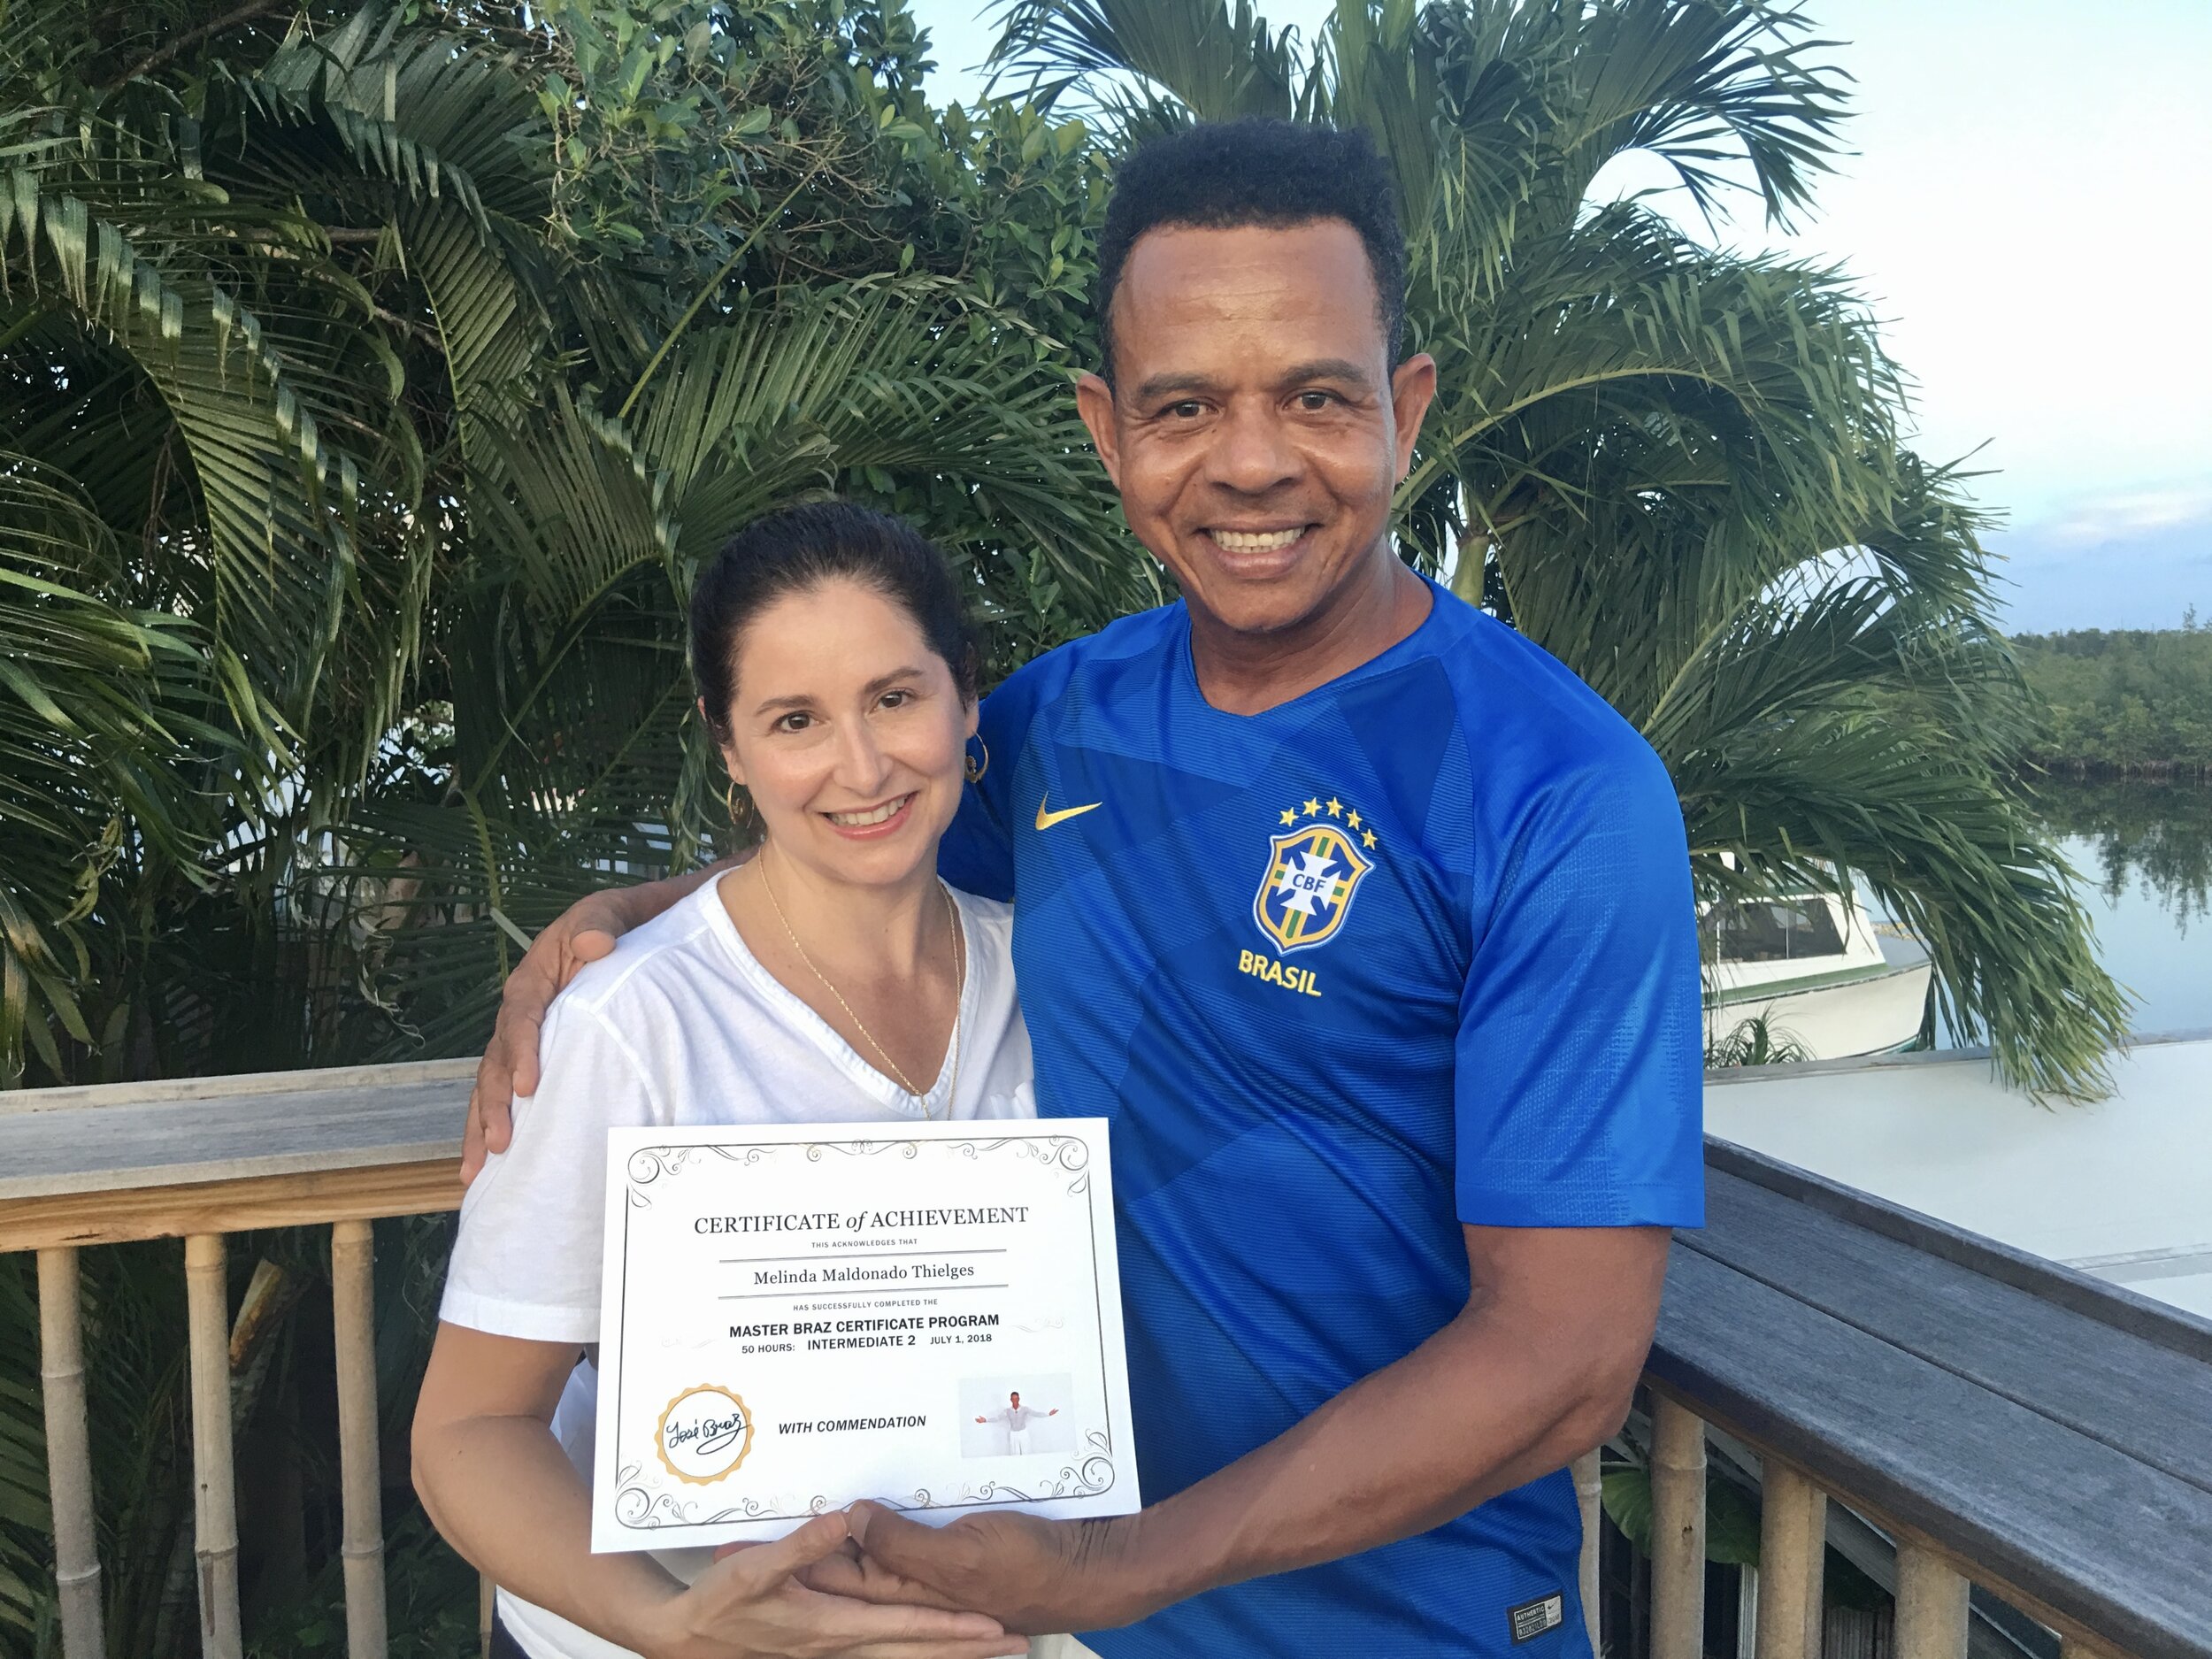 Mindy Theiges Receives Master Braz Certificate